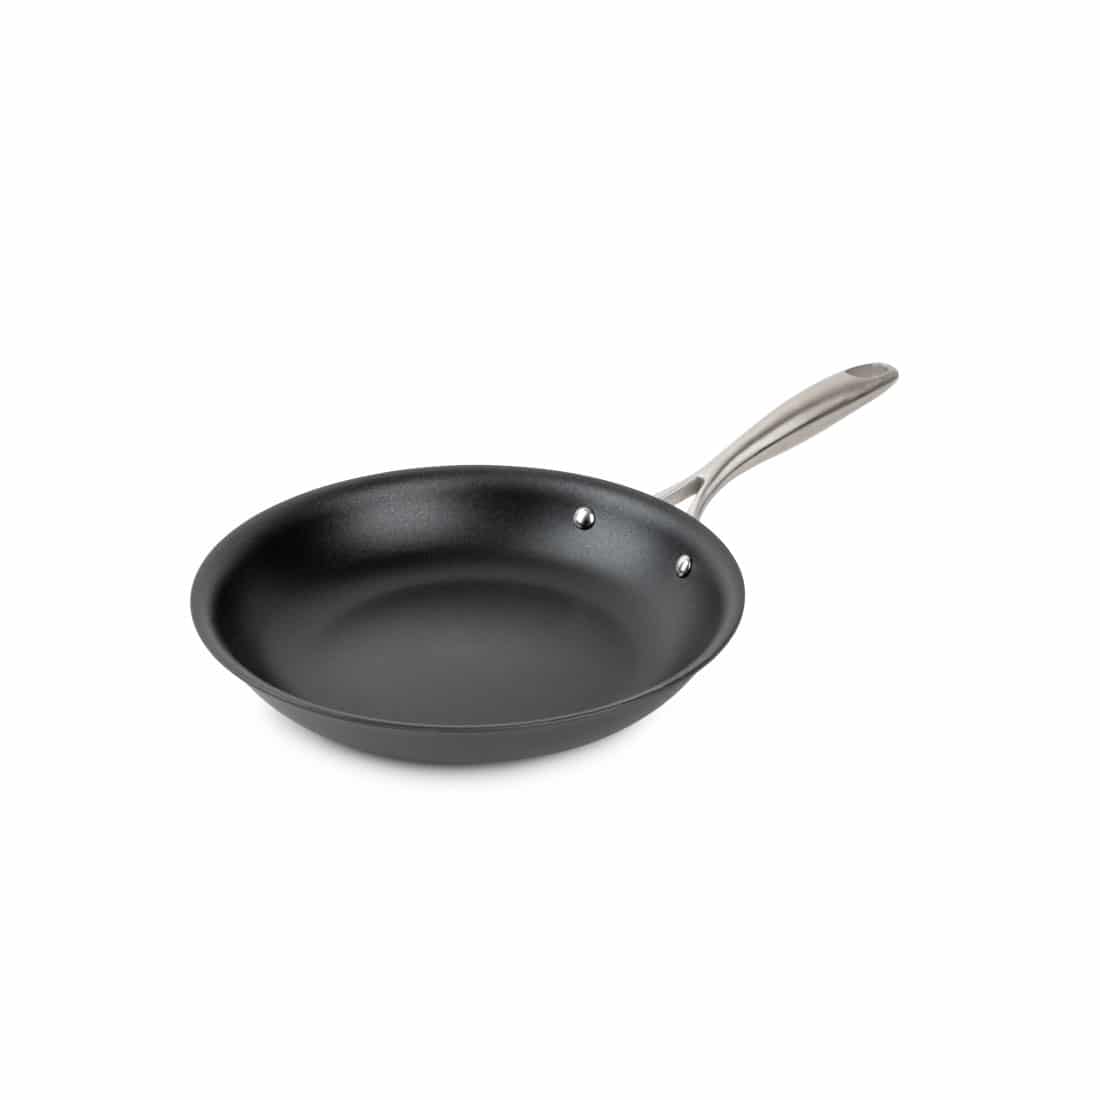 https://explorethymeandtable.com/wp-content/uploads/2021/02/hard-anodized-10in-frypan.jpg